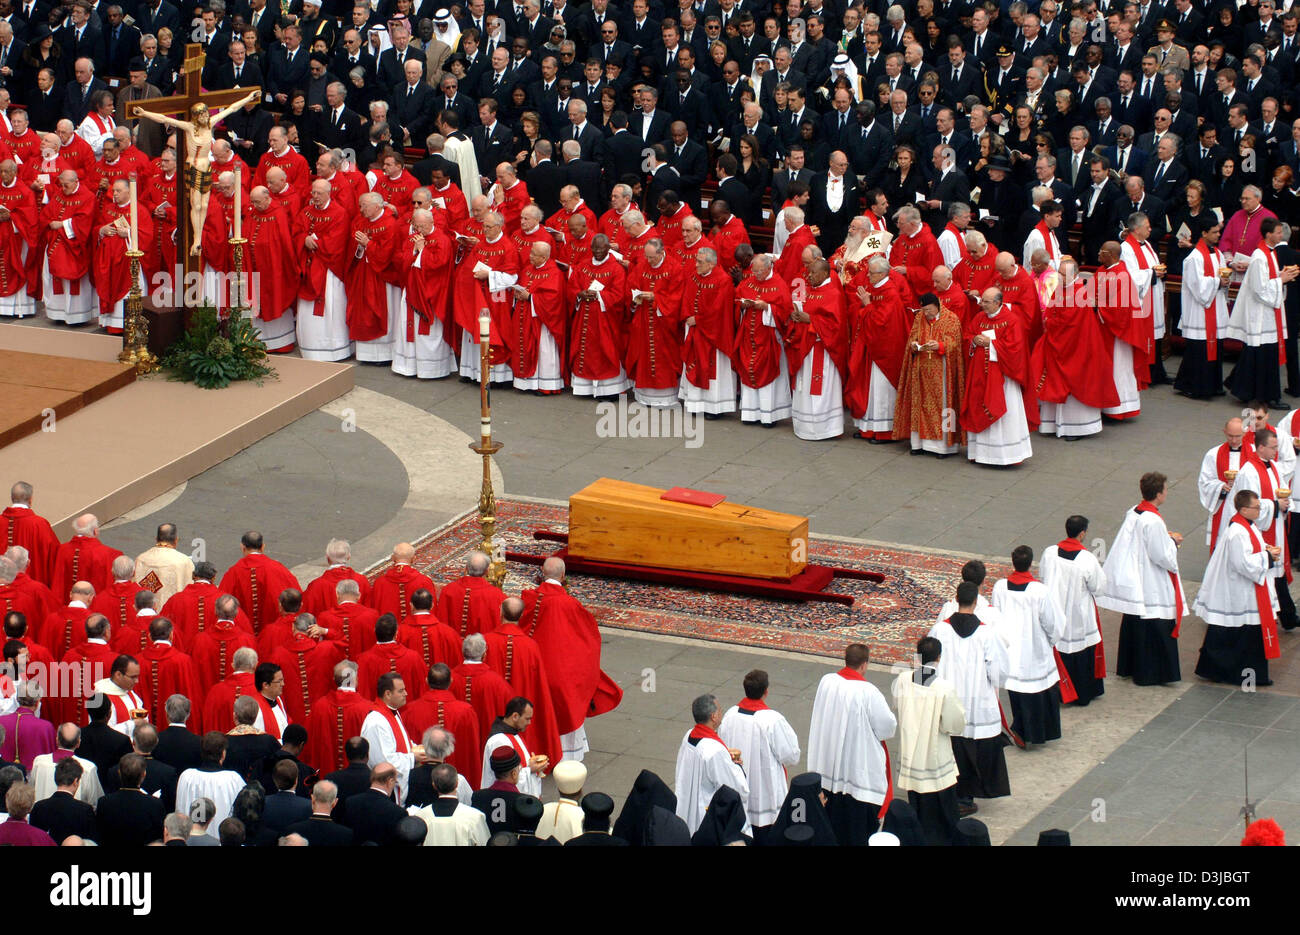 dpa) - The Cardinals have gathered around the coffin with the corpse of Pope  John Paul II during the funeral service at Saint Peter's Square in the  Vatican, Vatican City State, 8